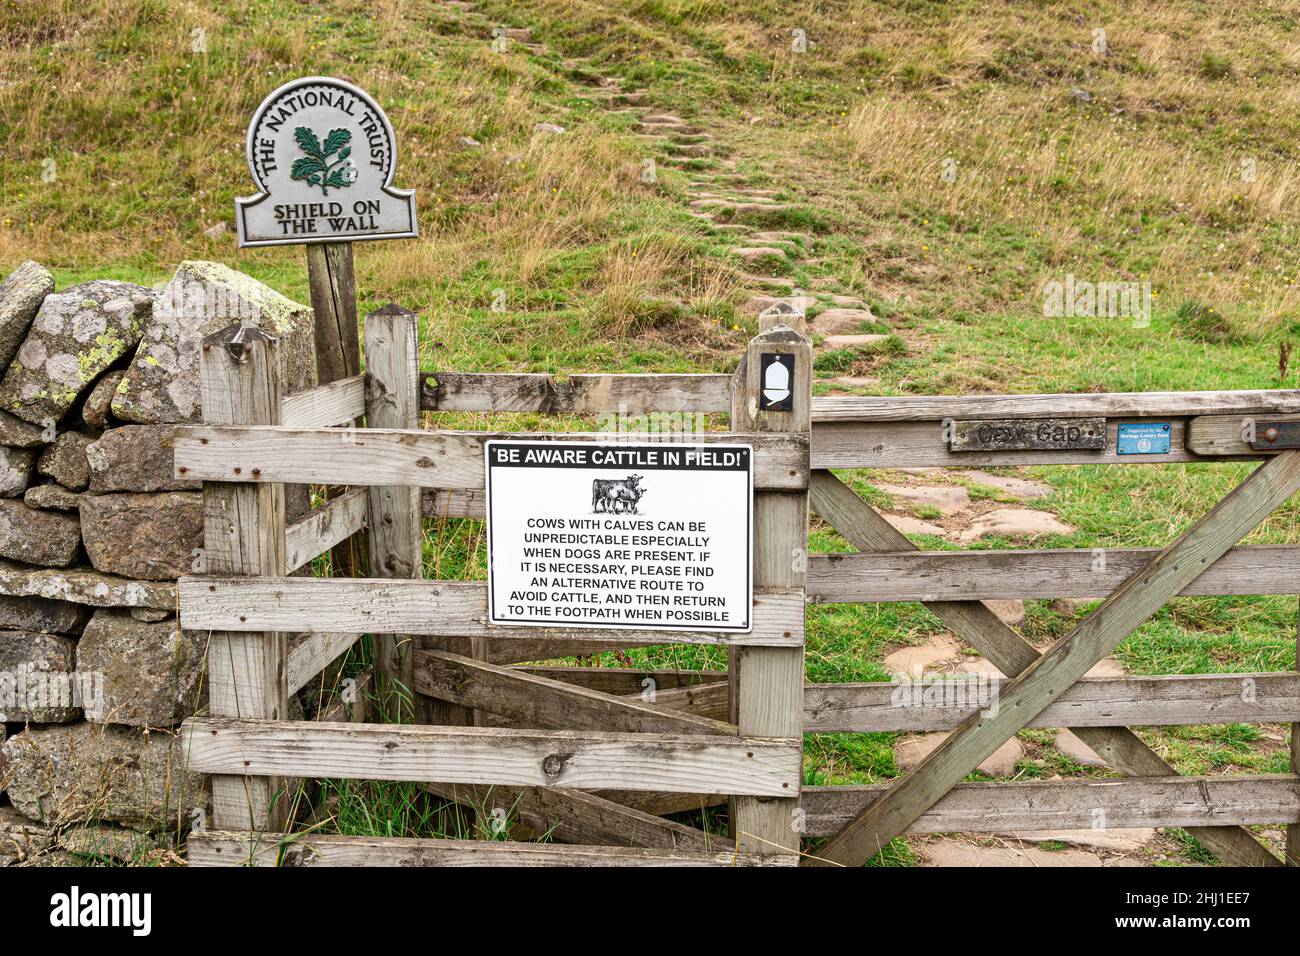 Be Aware Cattle in Field sign  at Caw Gap, Shield on the Wall, Northumberland UK Stock Photo